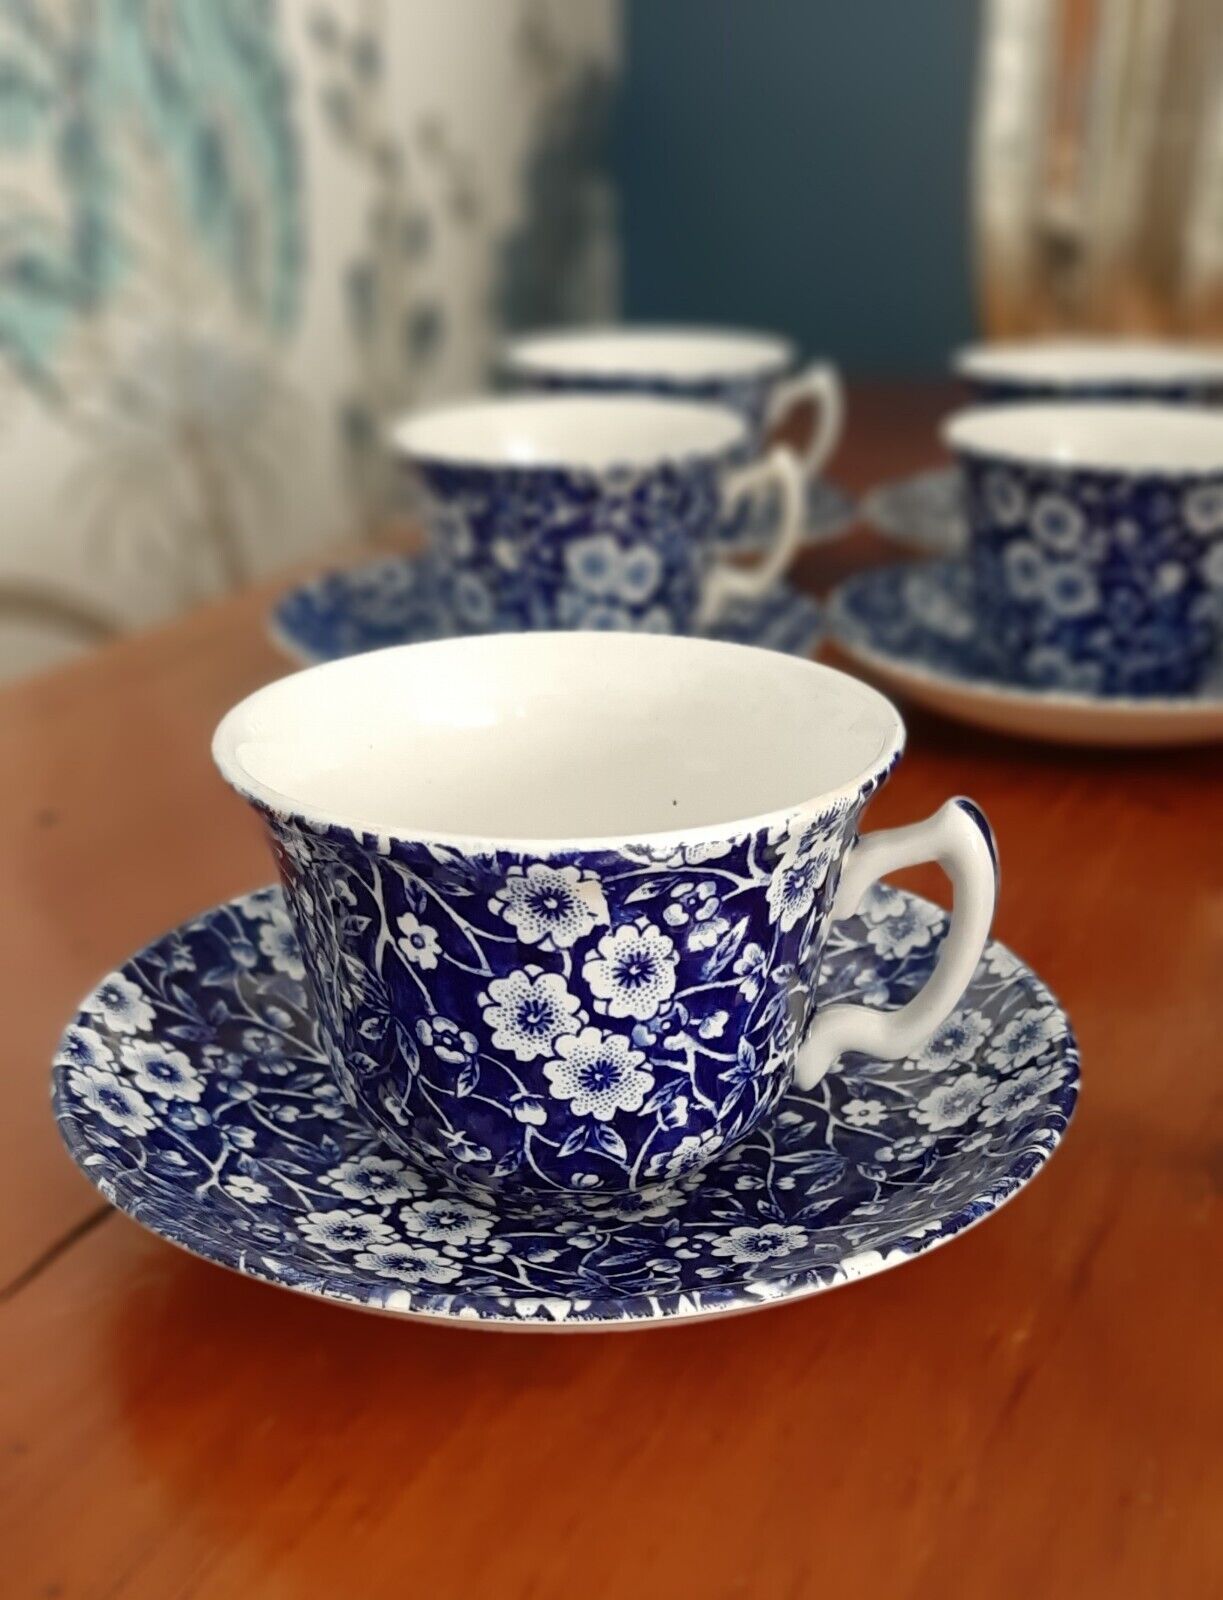 Vintage Burleigh Staffordshire England Blue Calico Cup & Saucer - 3 Available